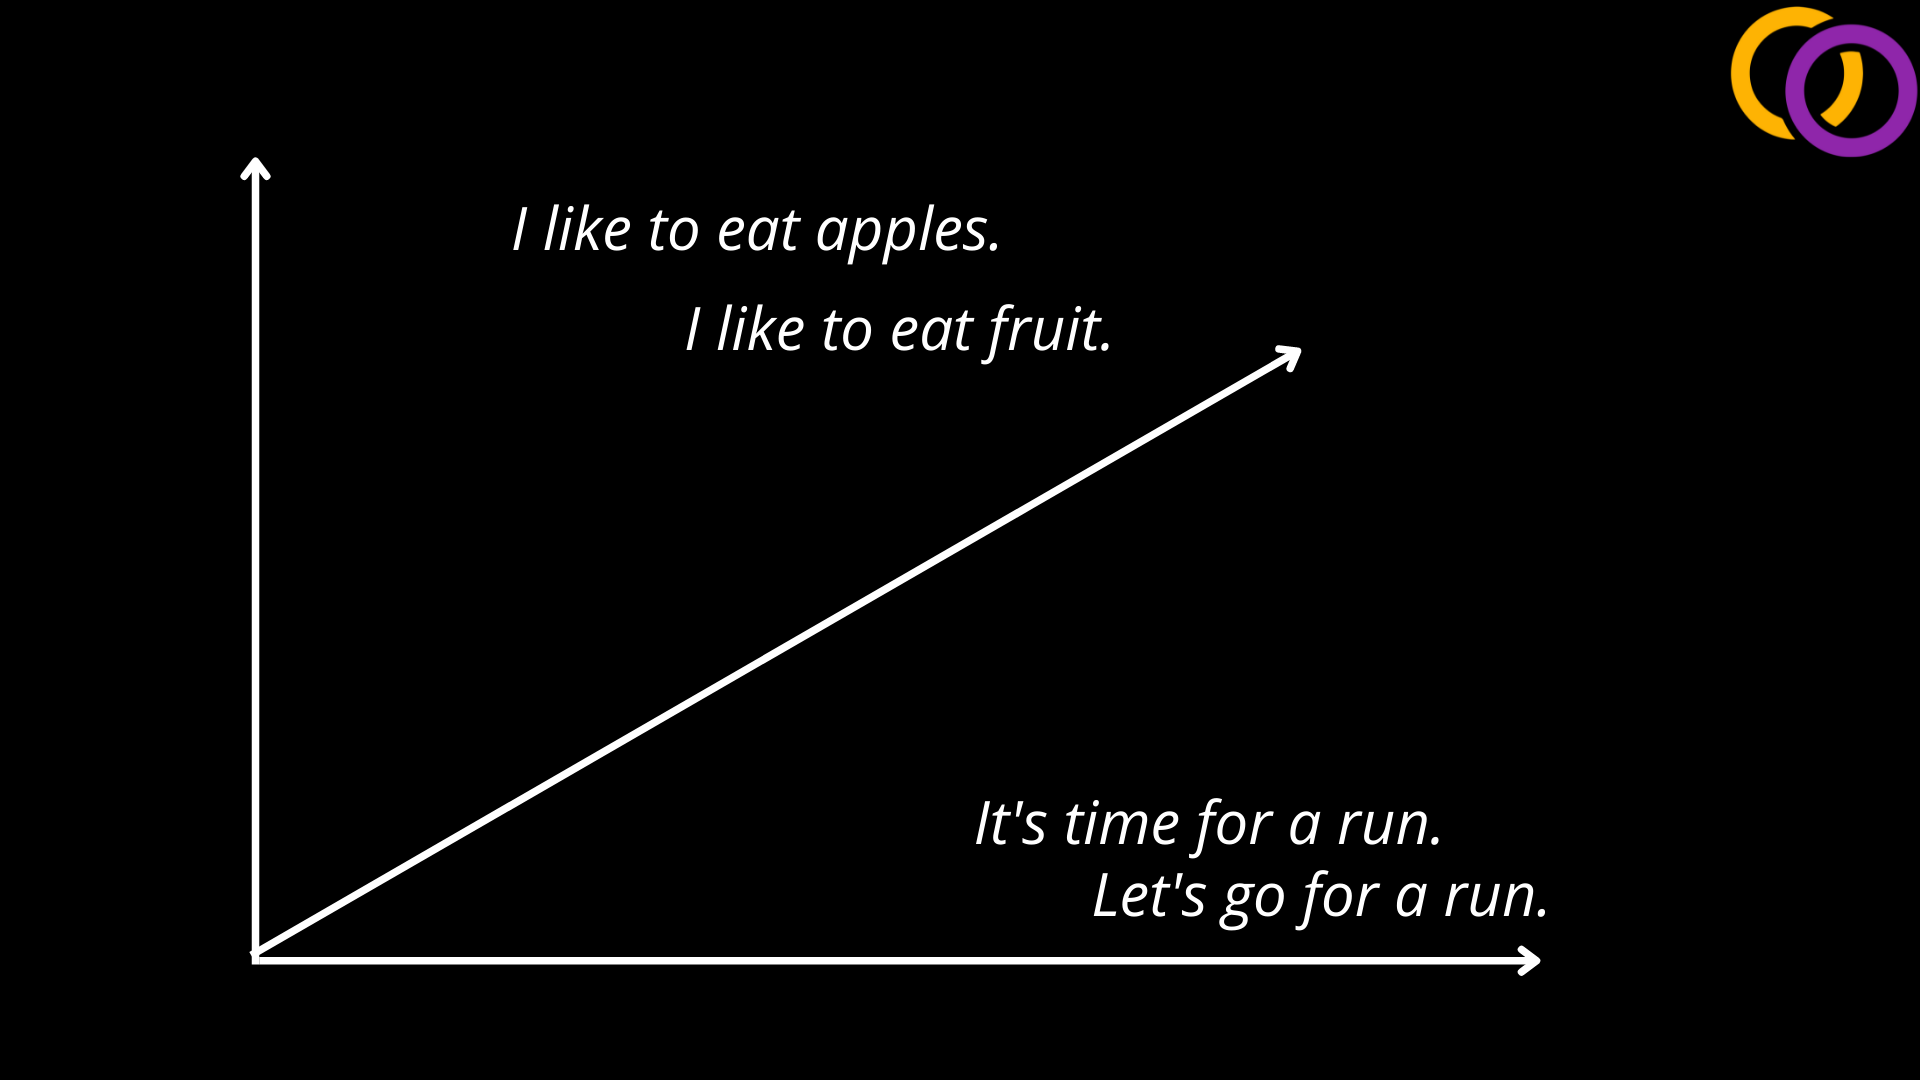 Shows two sentences "I like to eat apples" and "I like to eat fruit" close together. Then, two other sentences "It's time for a run" and "let's go for a run" close together, but far from the other sentences.